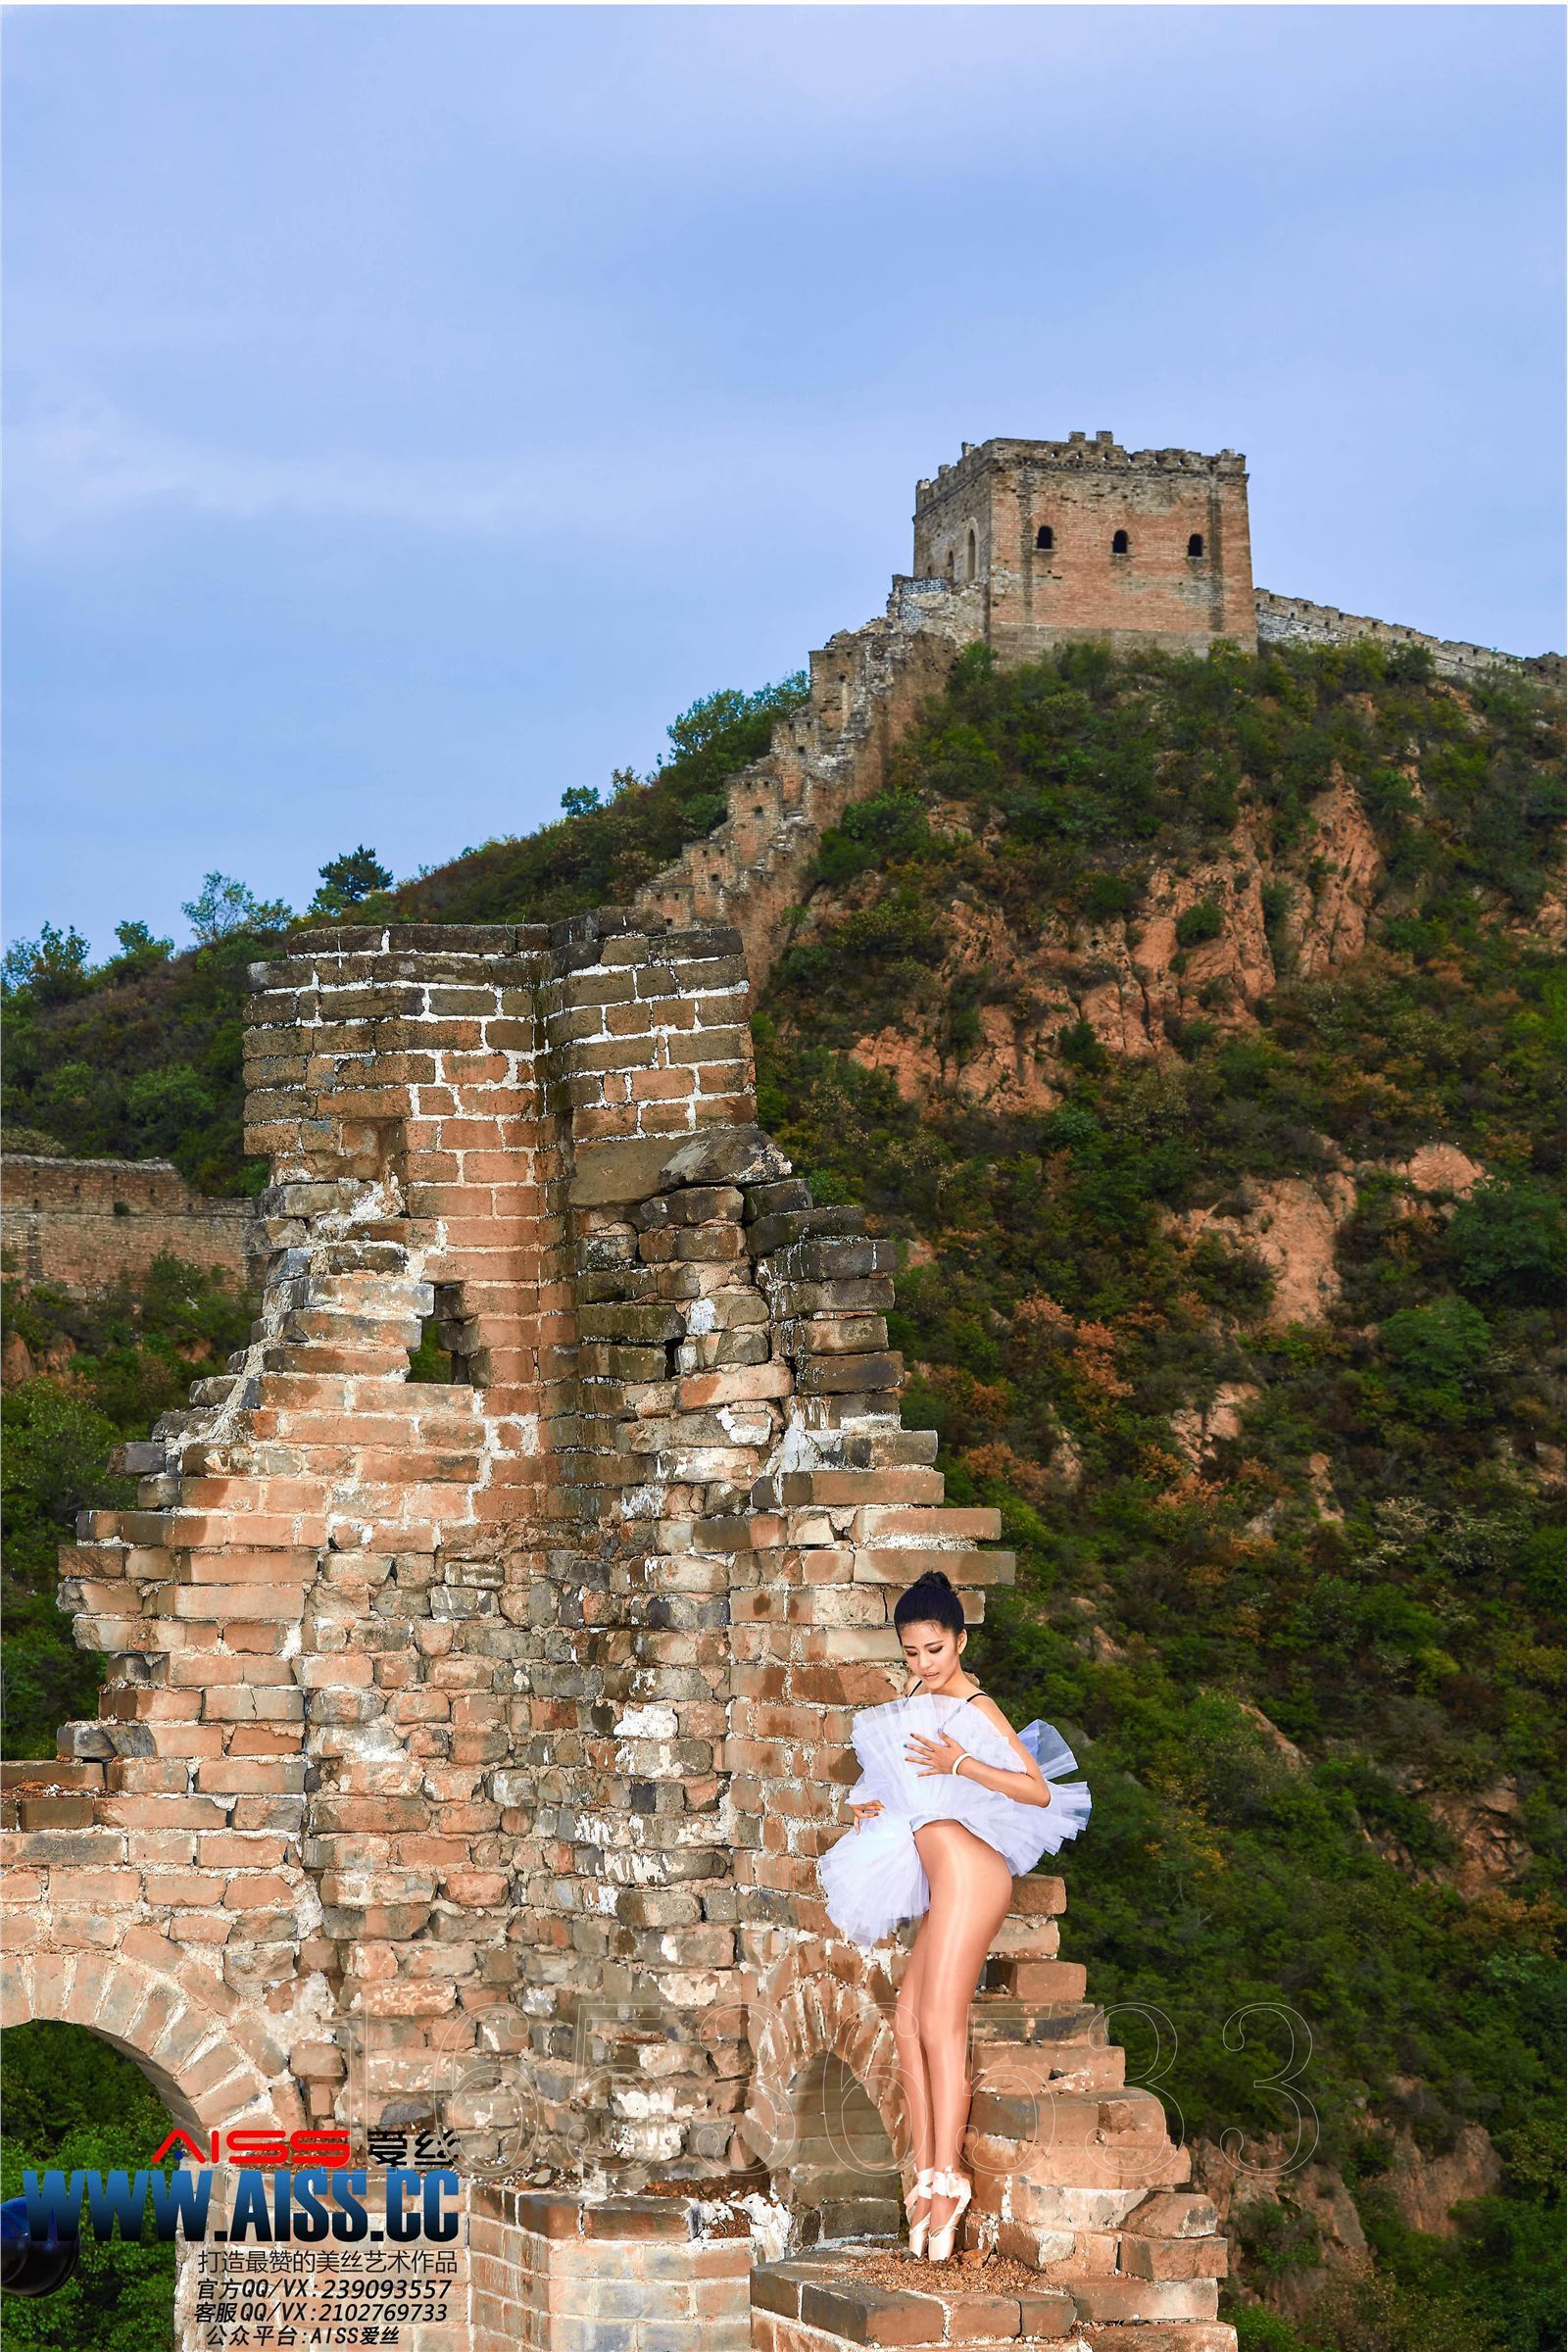 AISs No. 6016 [top of the Great Wall, dance of silk stockings]